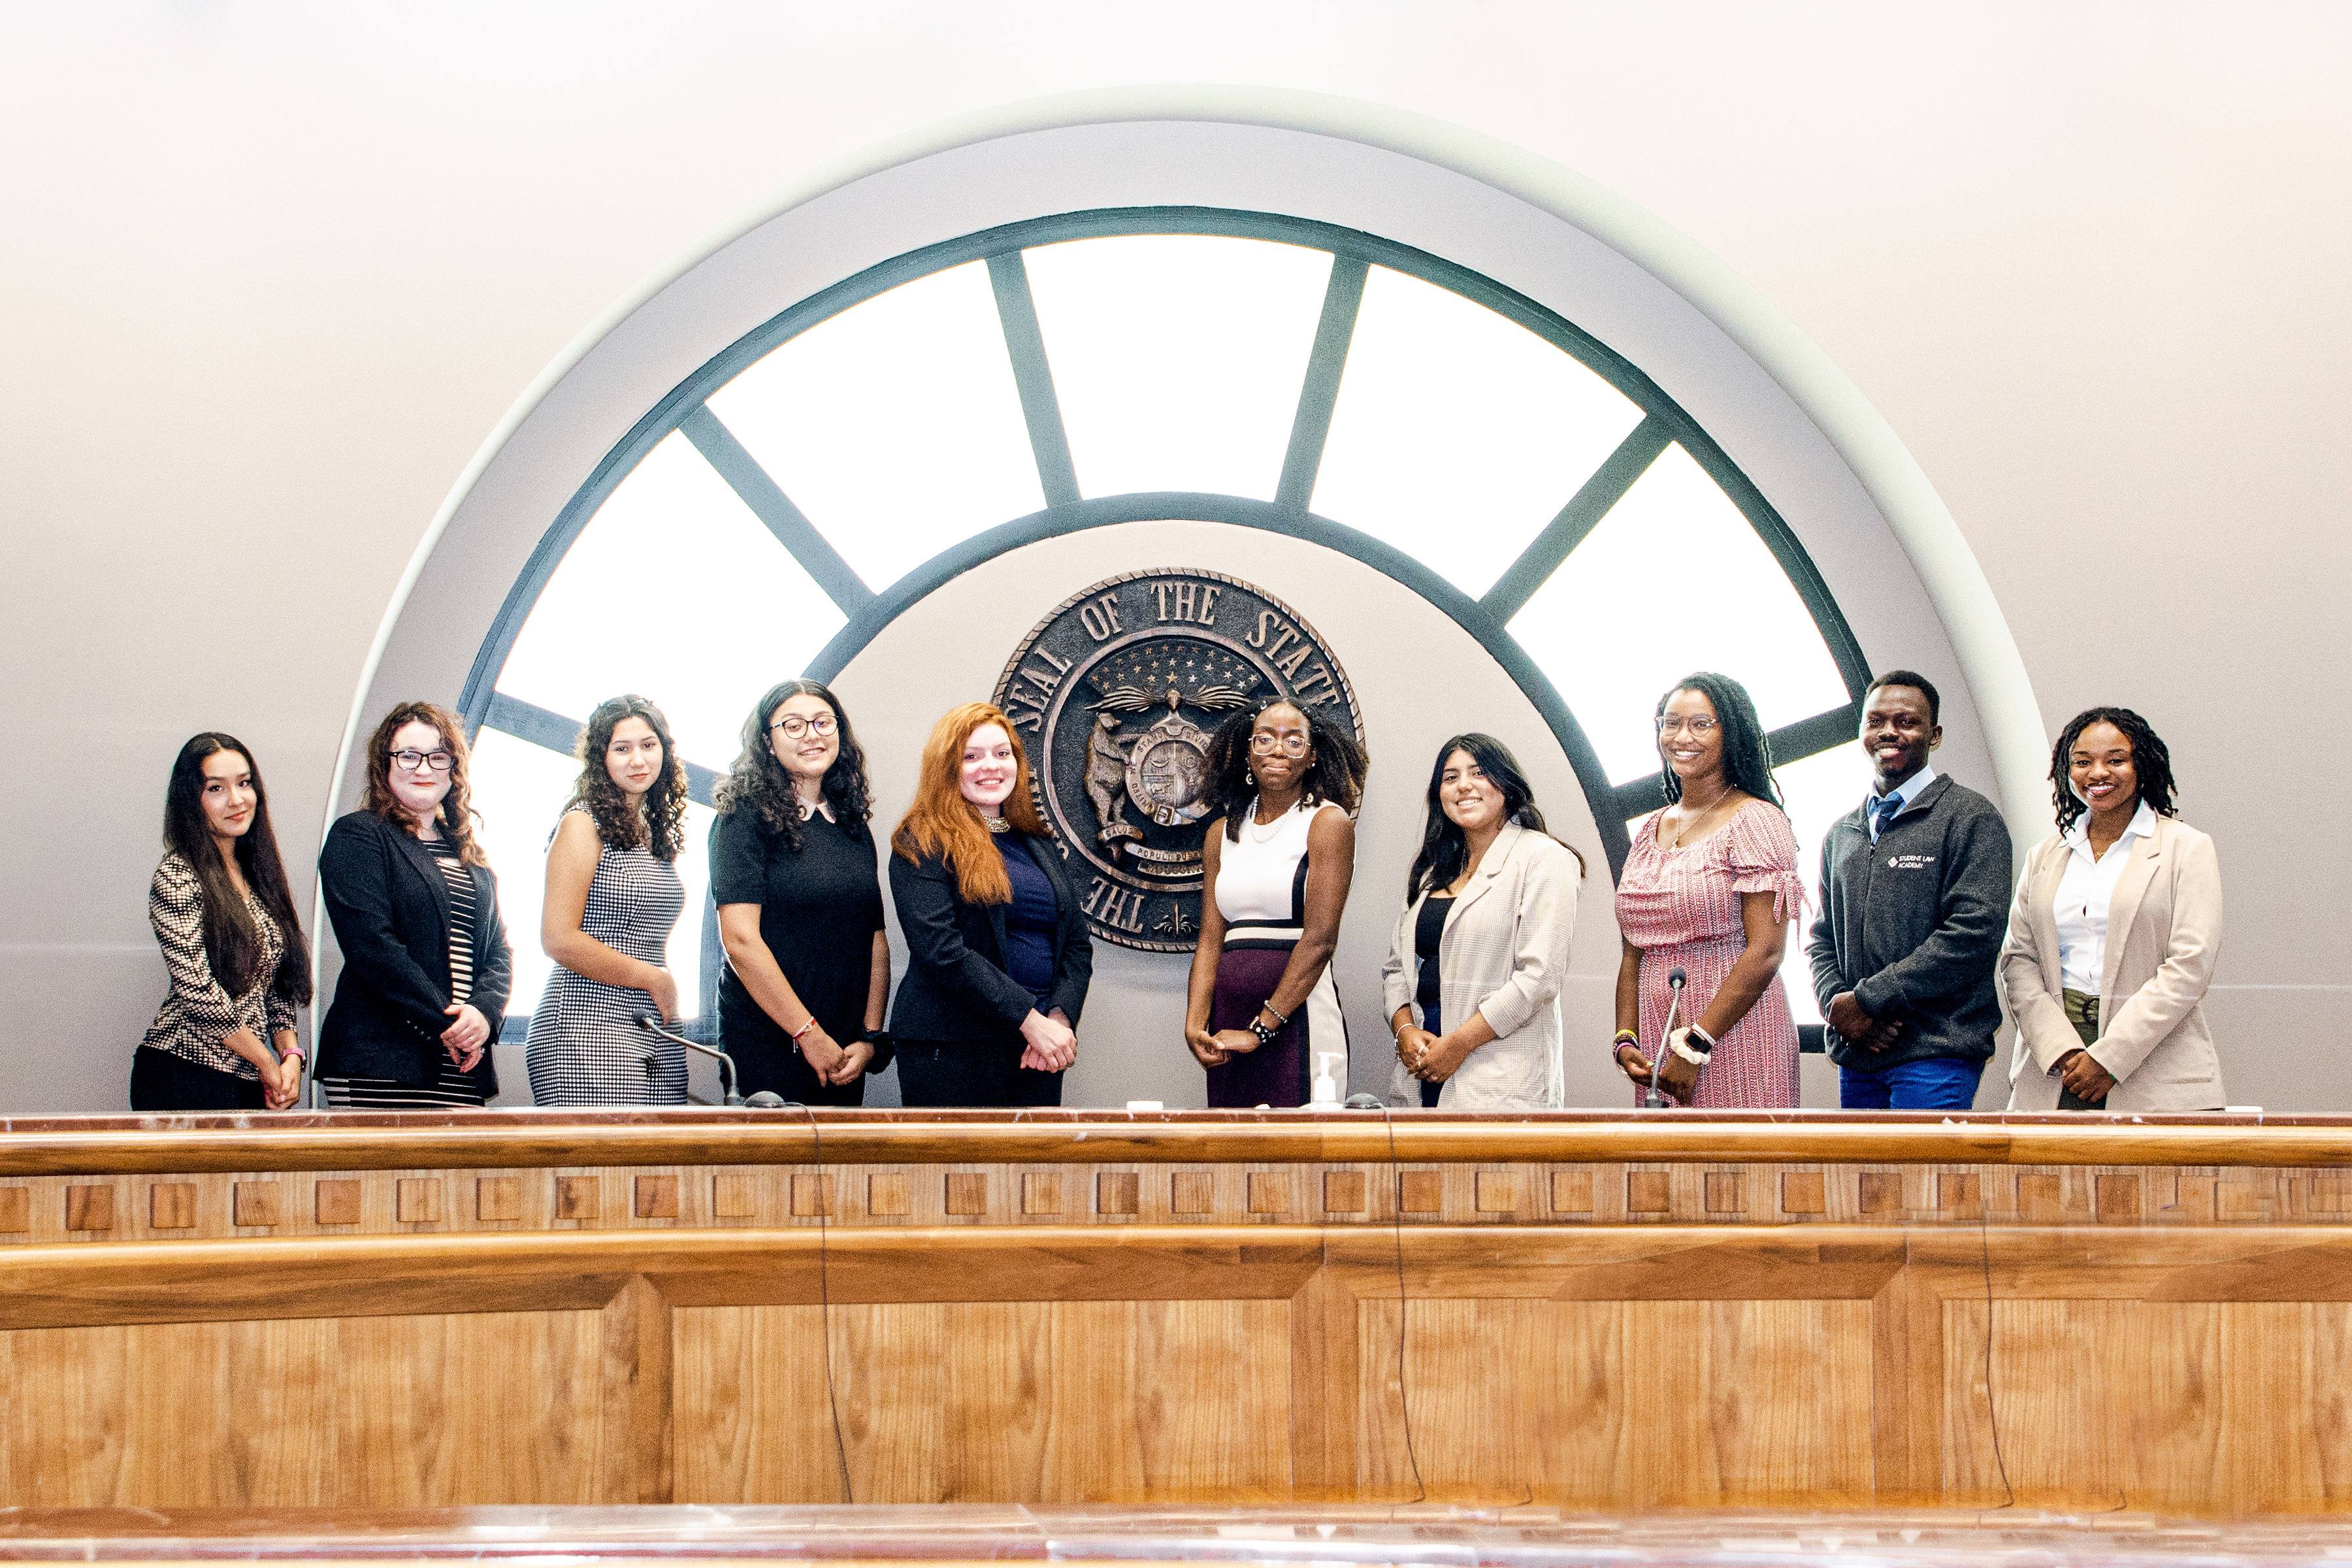 Image of 10 college students posing in front of a state seal and circular window.